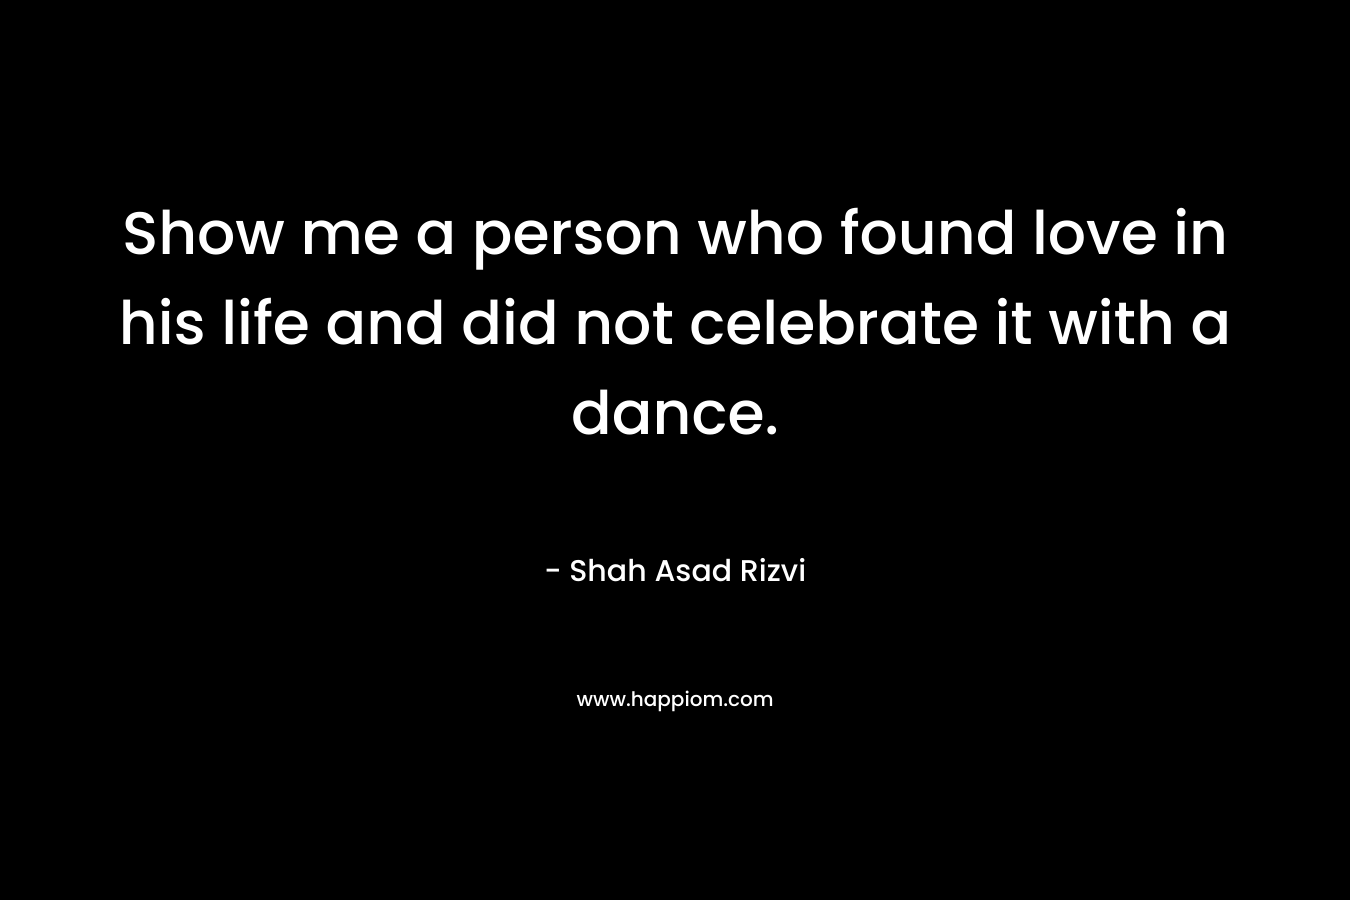 Show me a person who found love in his life and did not celebrate it with a dance.